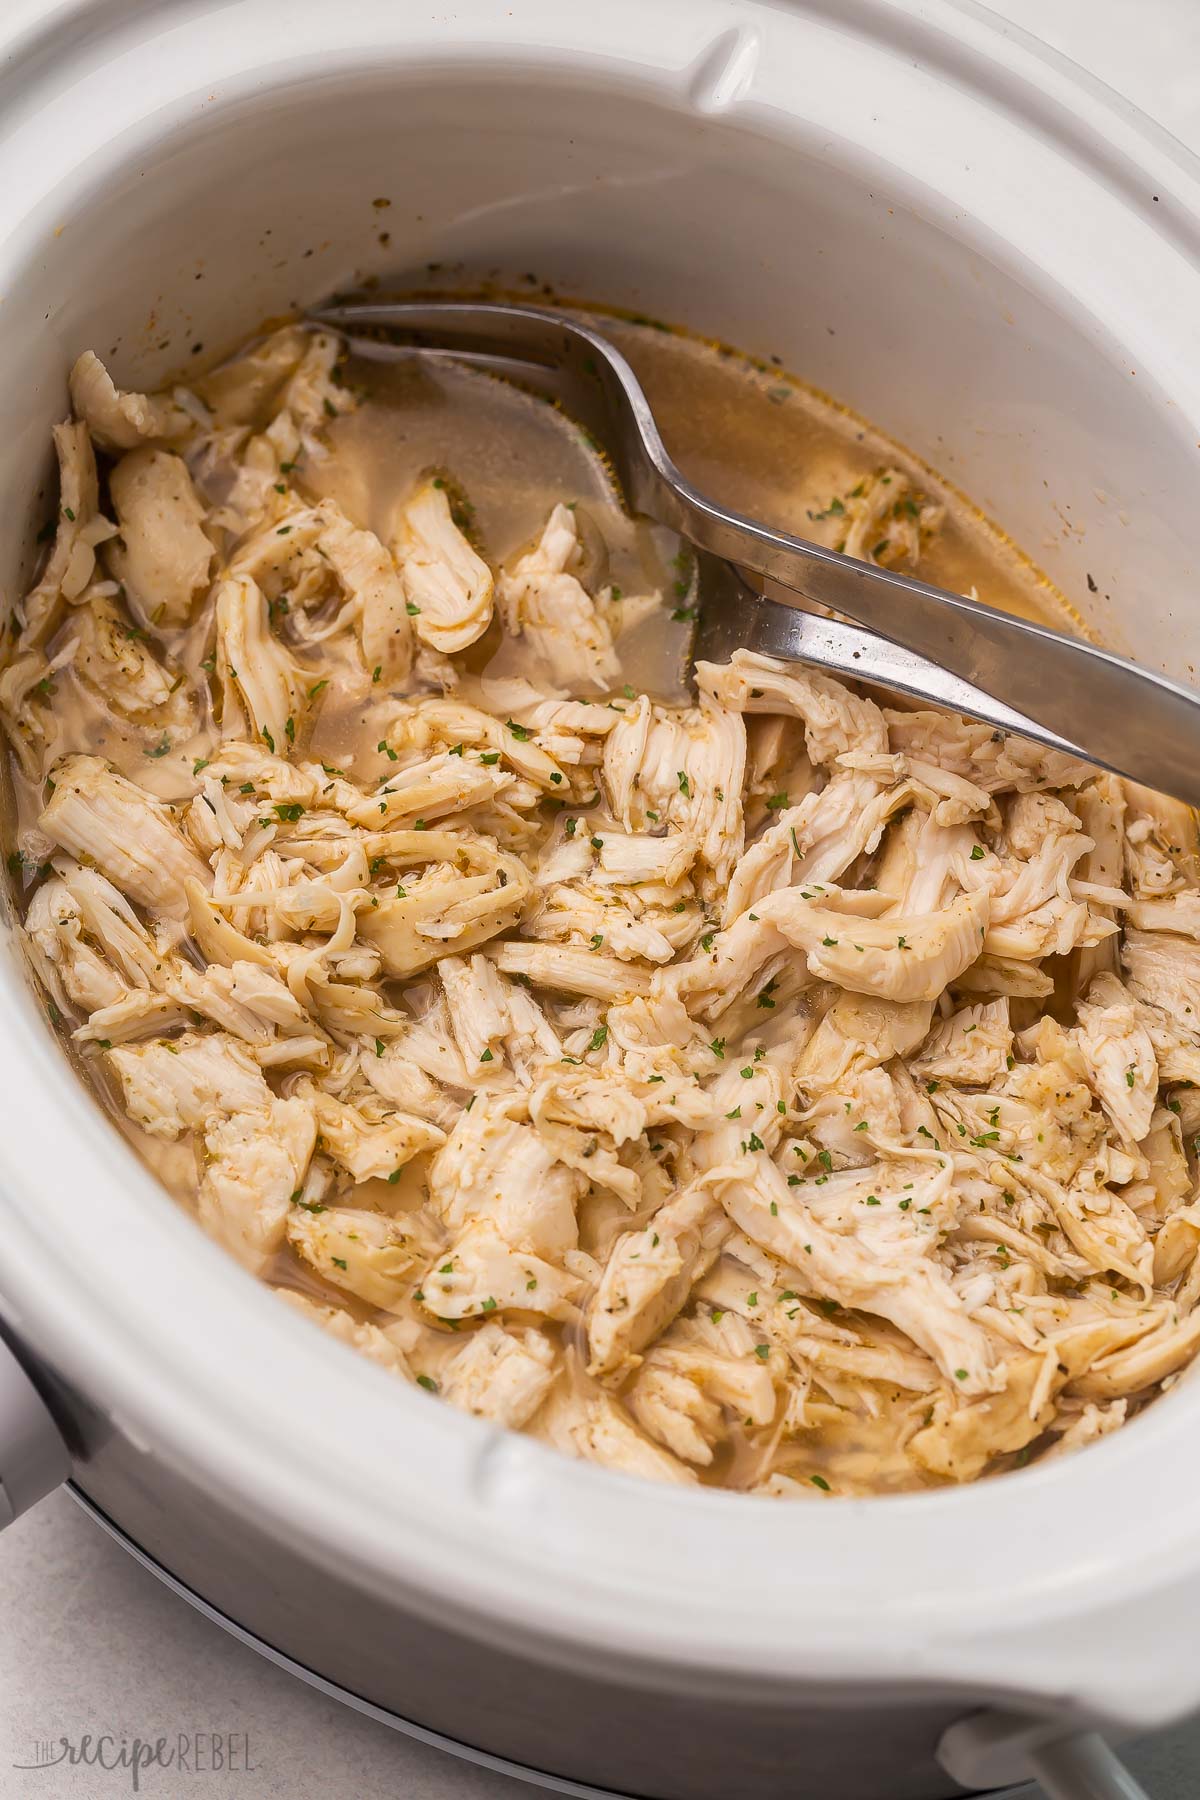 shredded chicken in juices in crockpot with two forks.